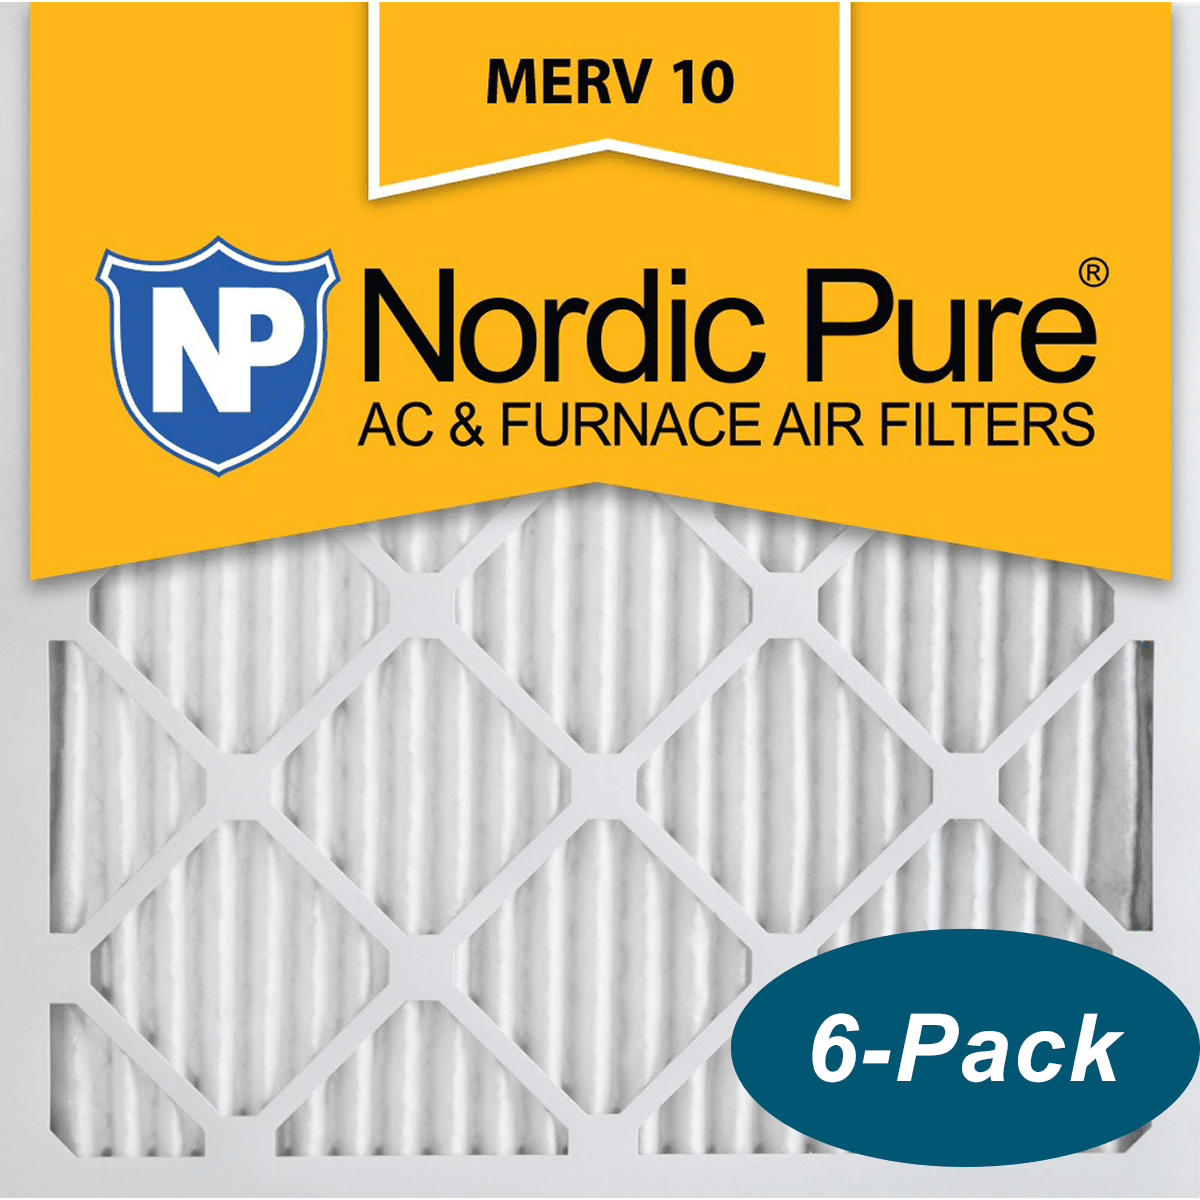 Nordic Pure MERV 10 Pleated Furnace Filter 20x20x1 6-Pack (20x20x1M10-6)